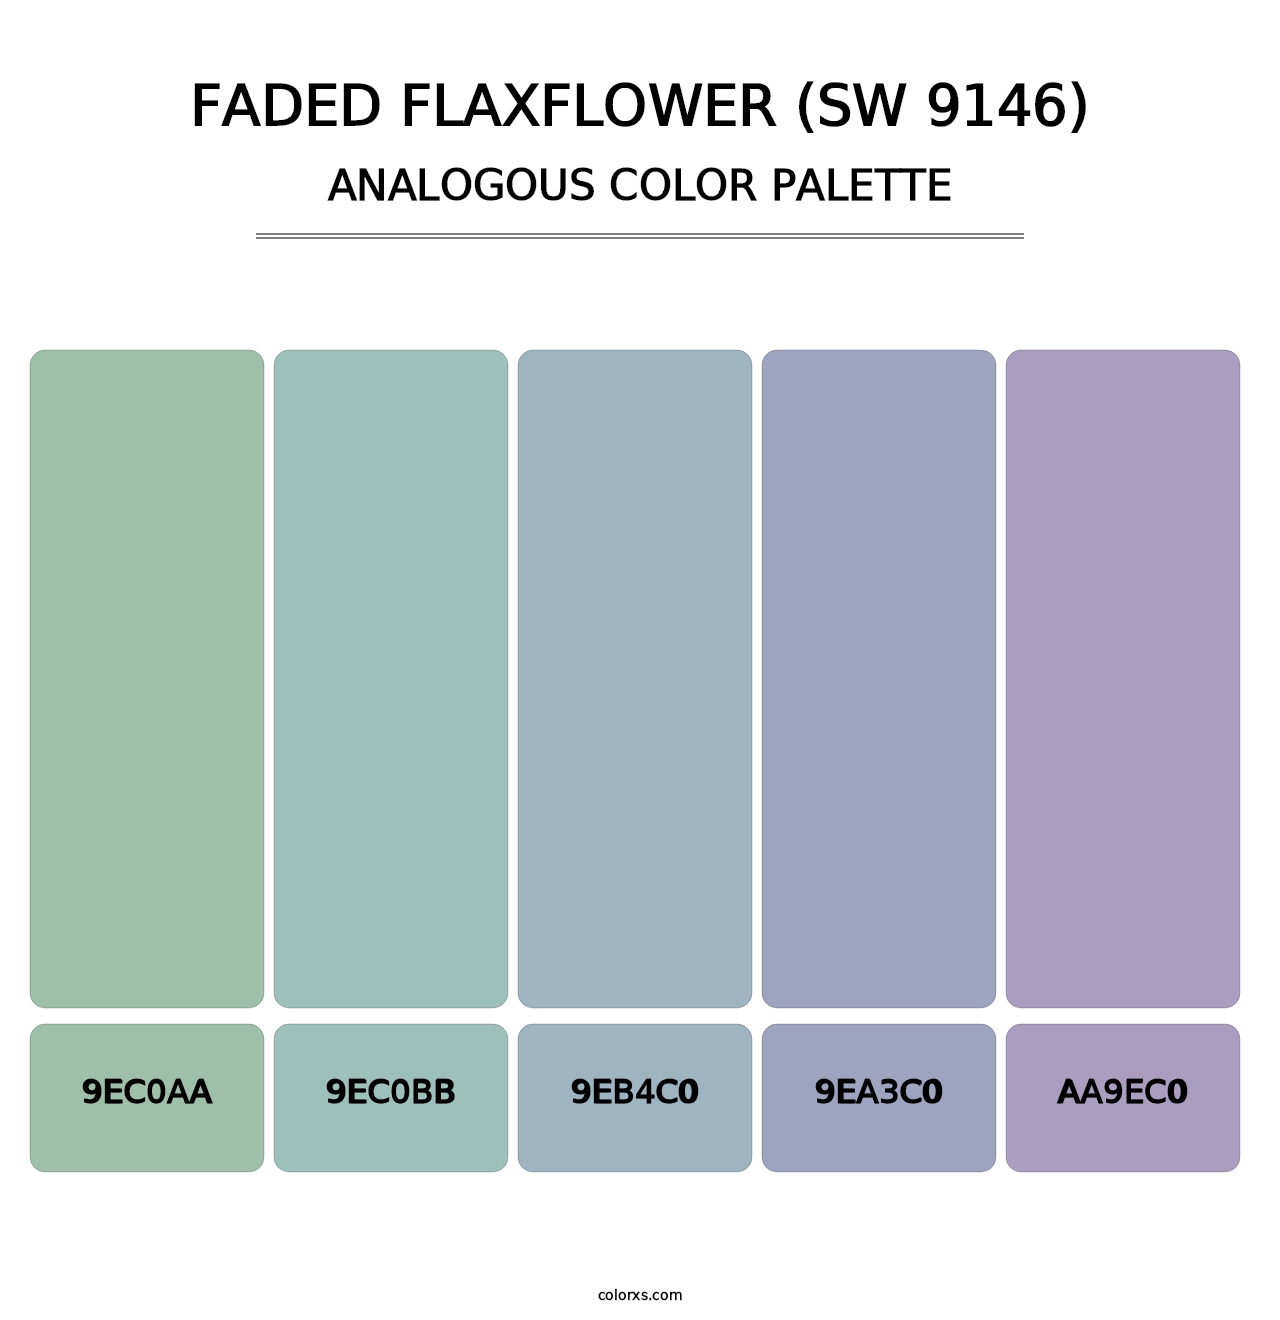 Faded Flaxflower (SW 9146) - Analogous Color Palette